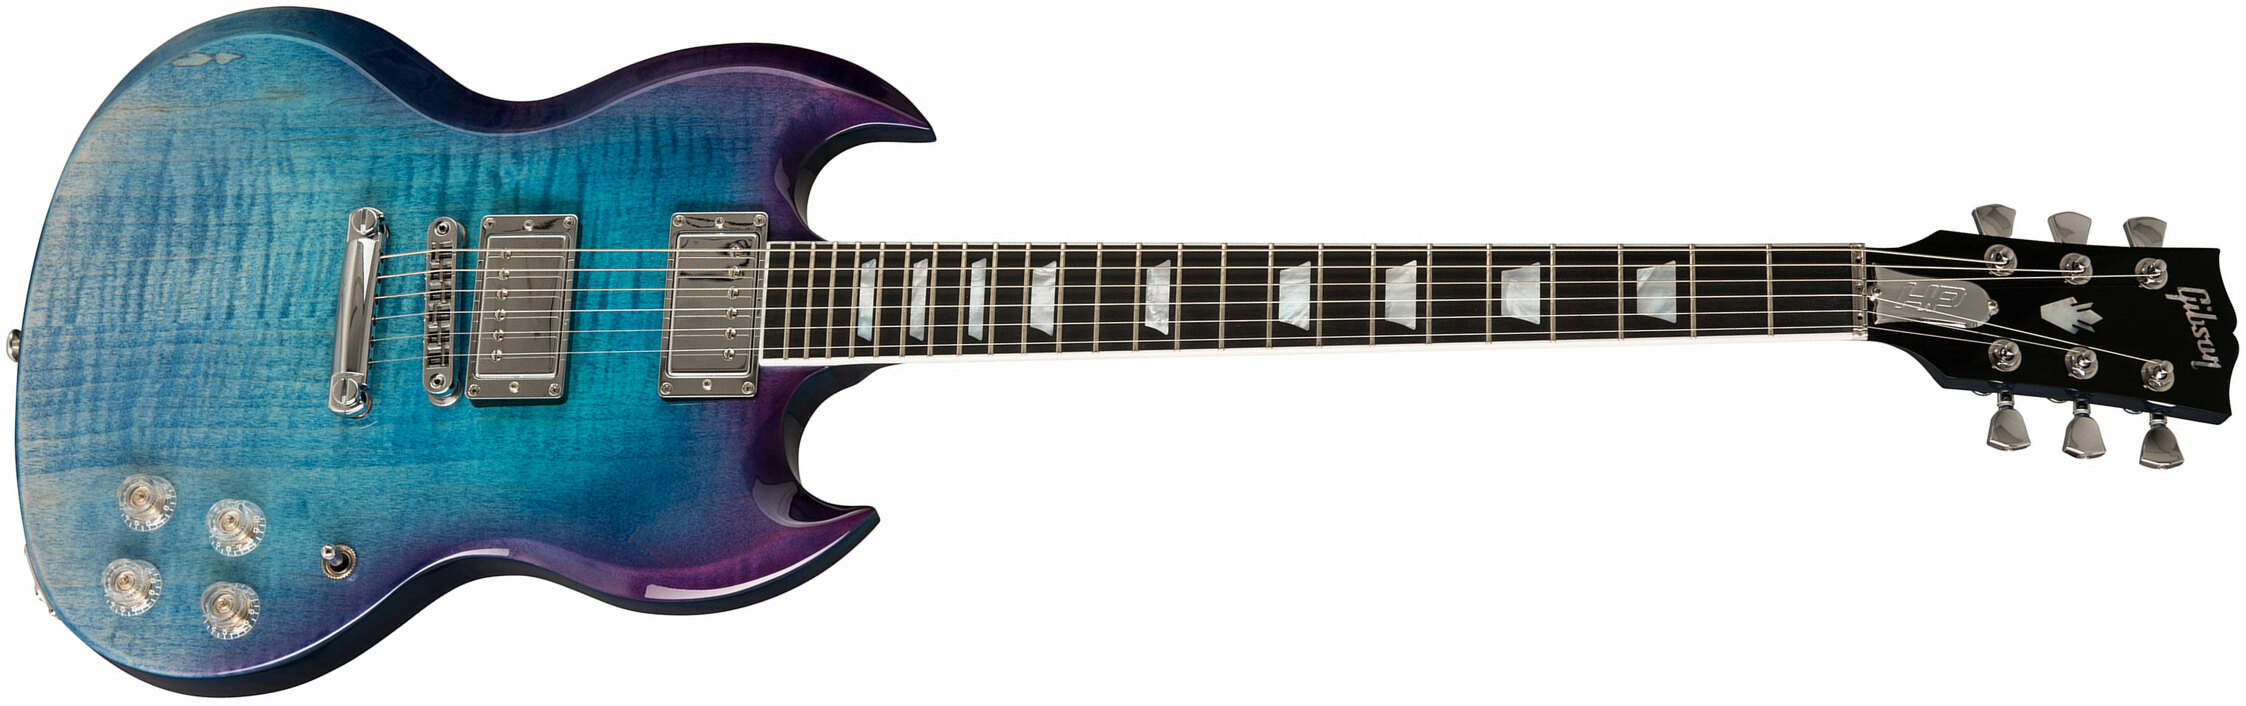 Gibson Sg Standard Hp-ii High Performance 2019 2h Ht Ric - Blueberry Fade - Guitare Électrique Double Cut - Main picture